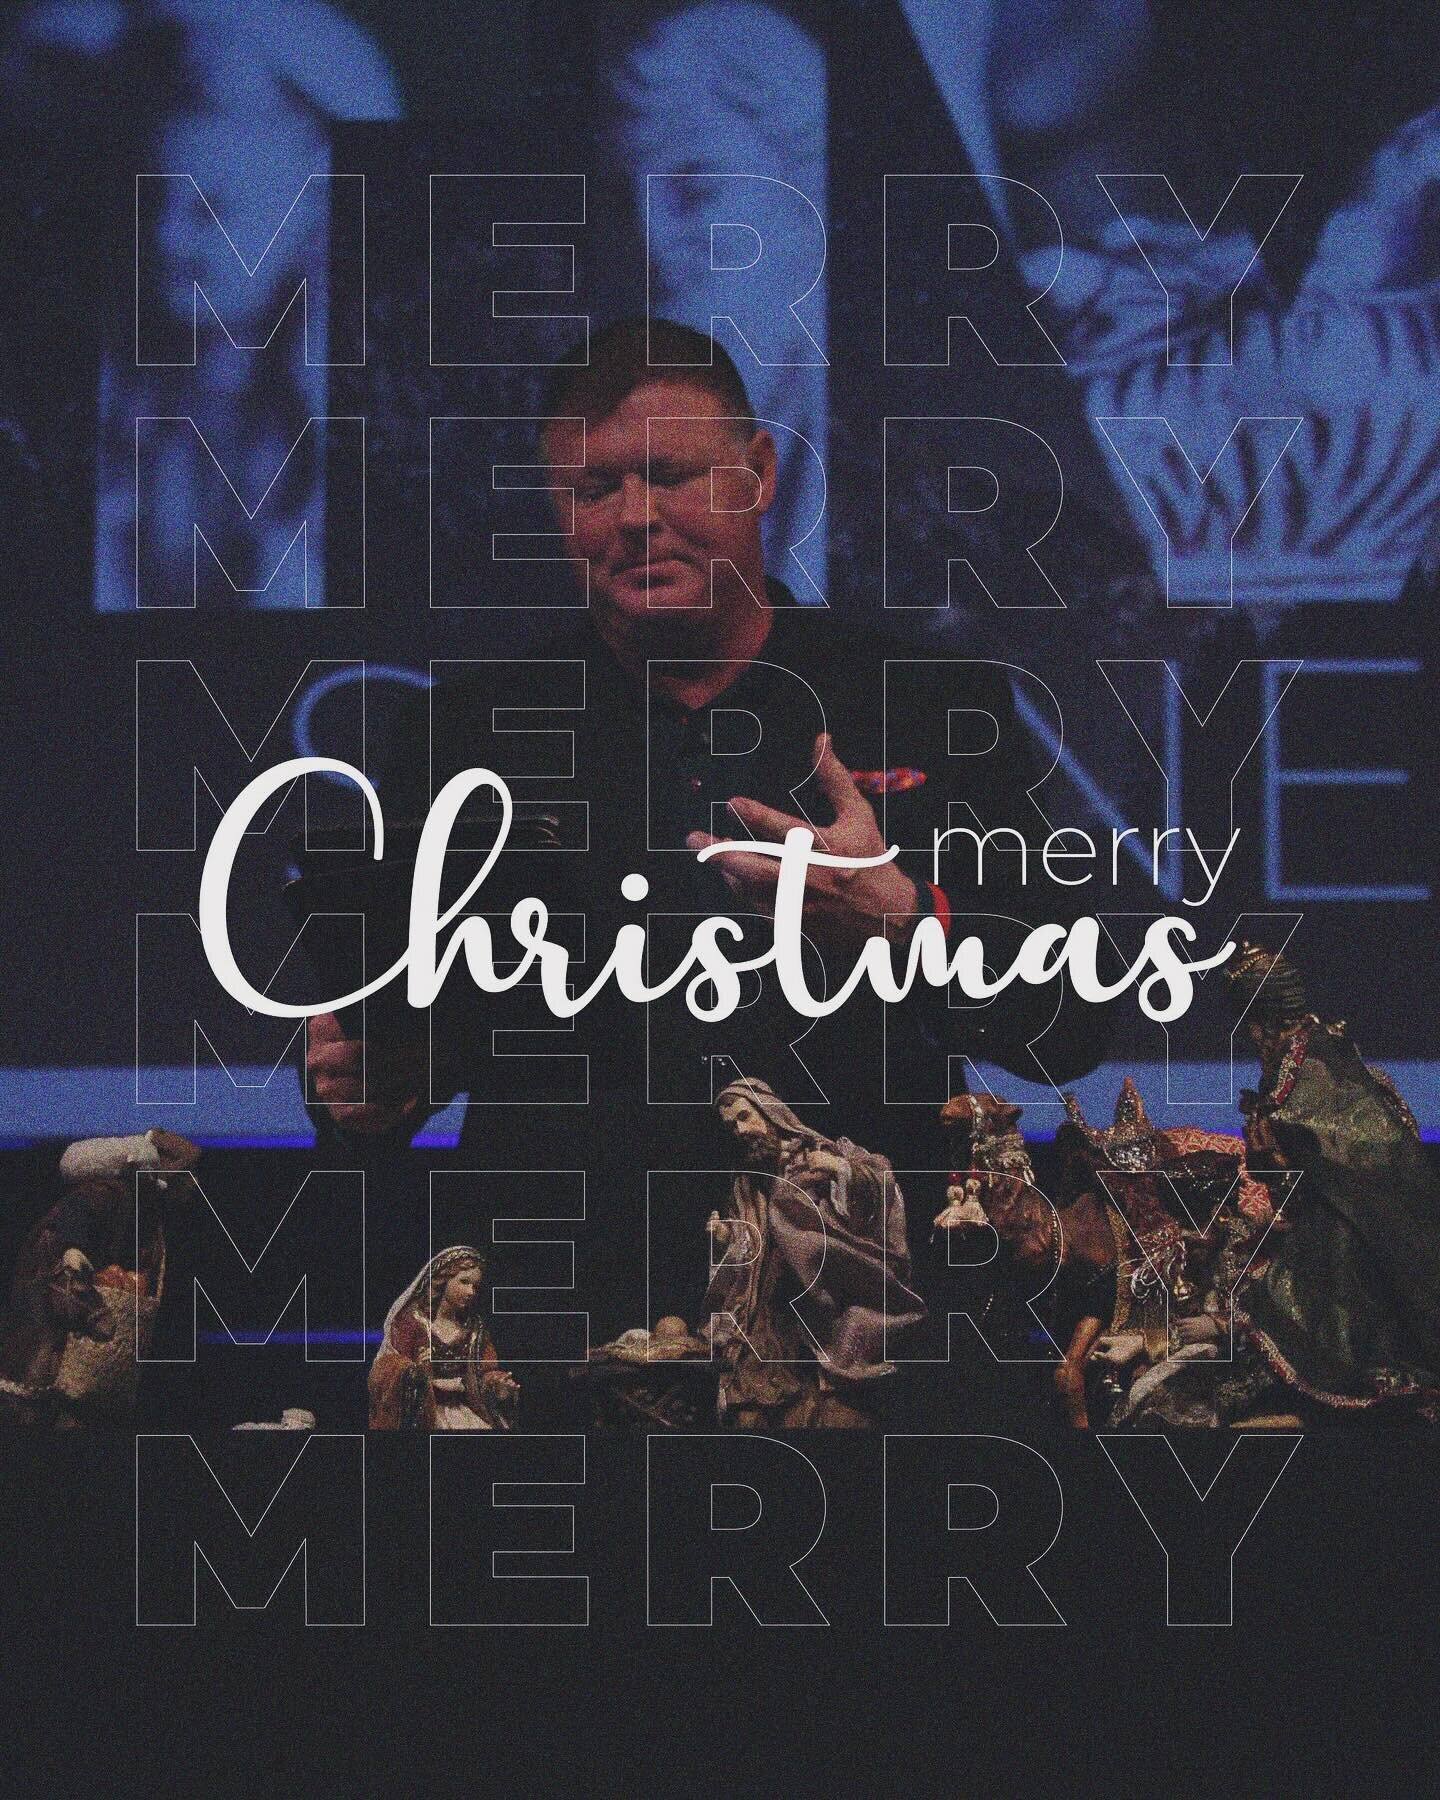 May the joy of Christmas fill your hearts with peace, love, and the blessings of the season. Wishing you a Merry Christmas from our church family to yours!🎄✨